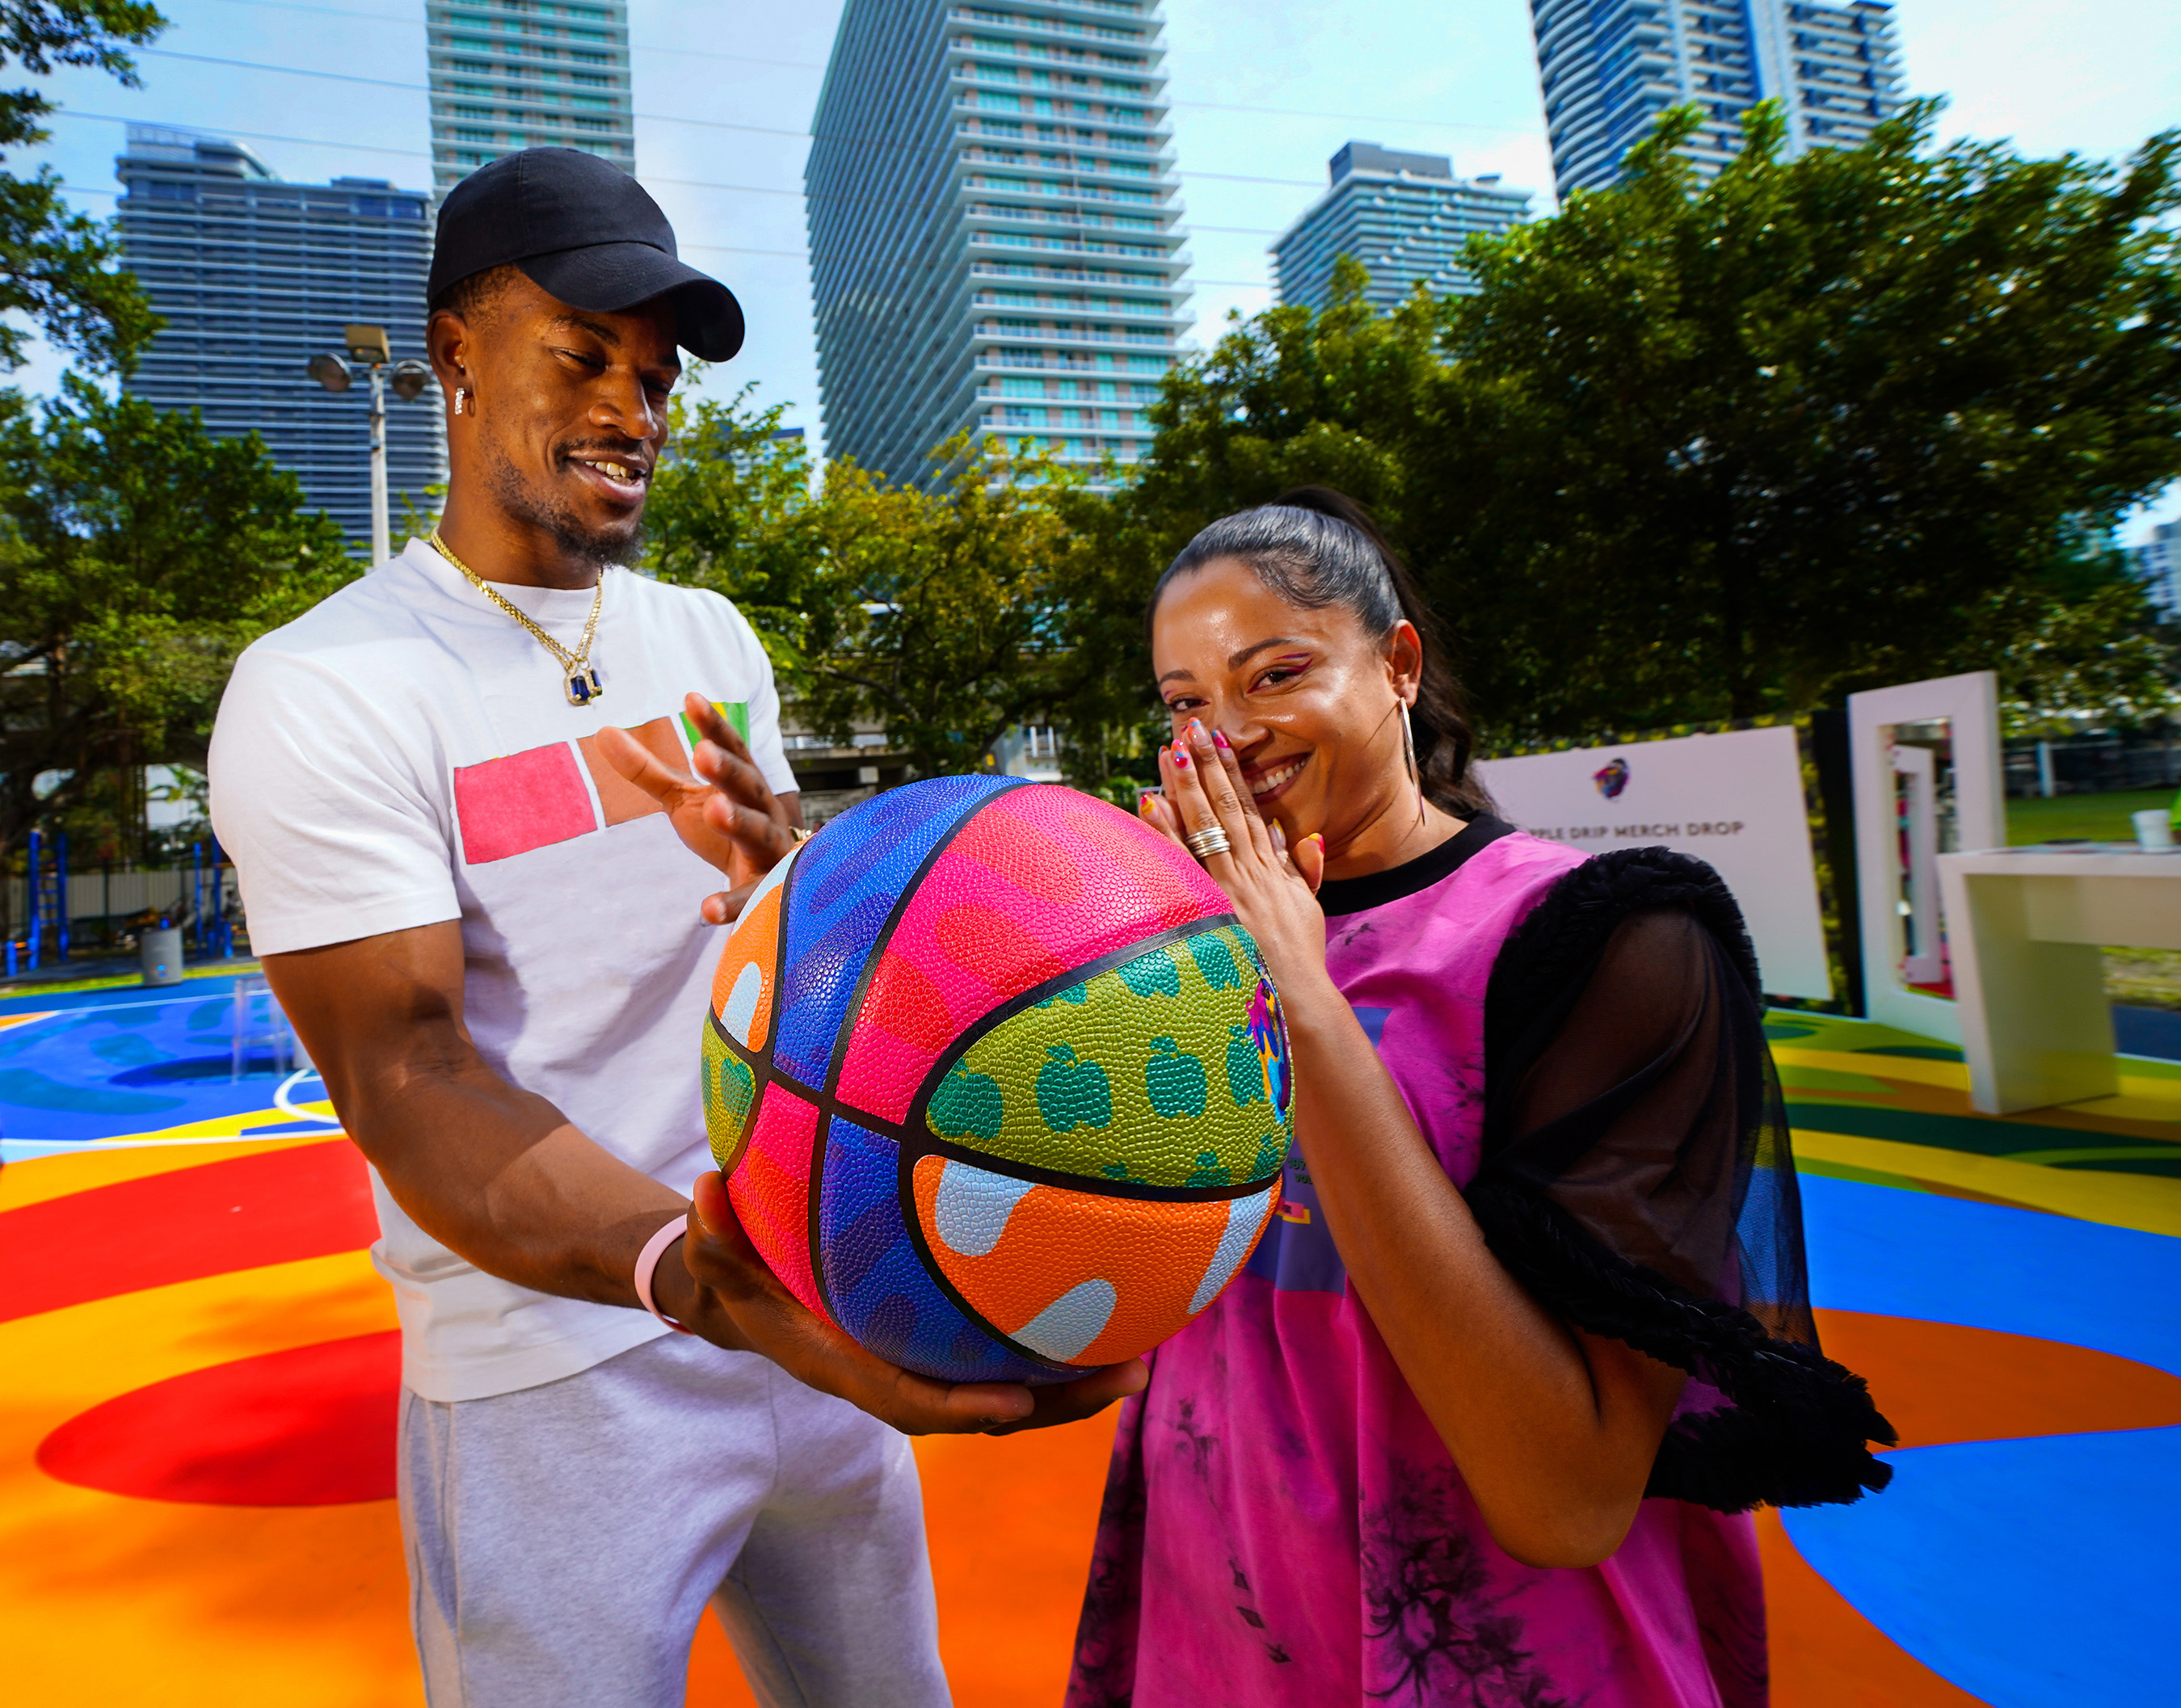 Jimmy Butler and D'Ana of COVL join Crown Royal Regal Apple to give back to the Miami community with The Royal Court at Miami Art Week (Photo by Jack Dempsey for Crown Royal)